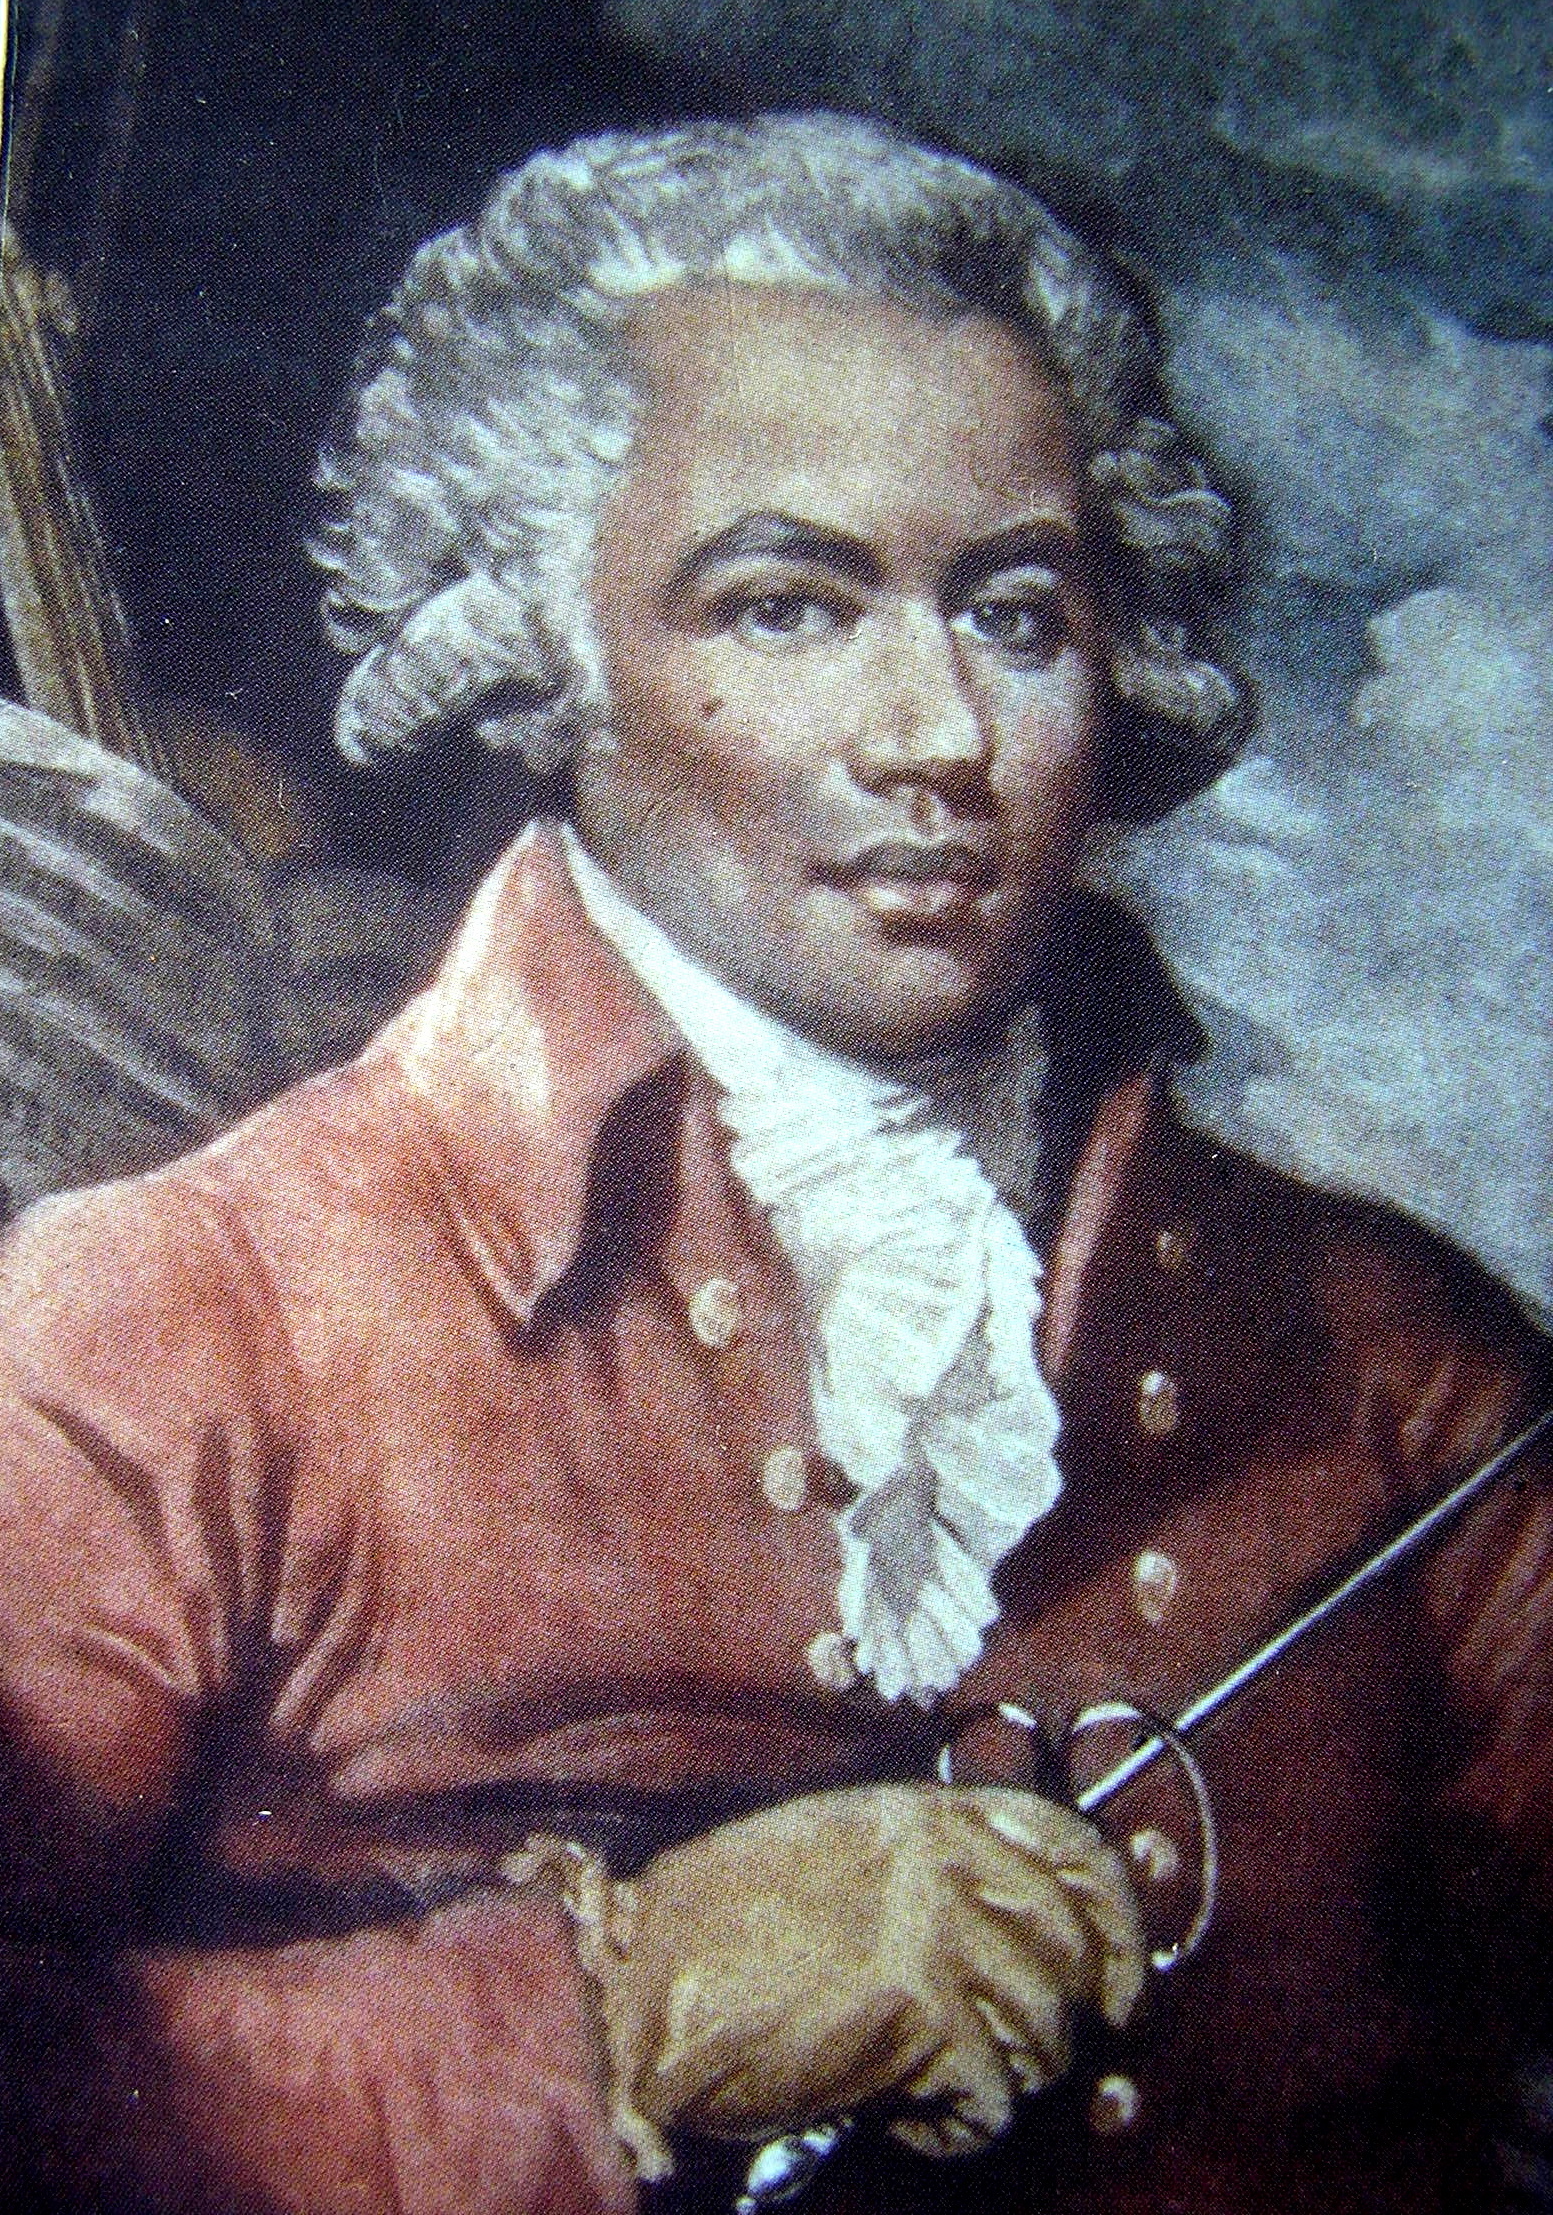 Thoughts on writing about an 18th-century black violinist